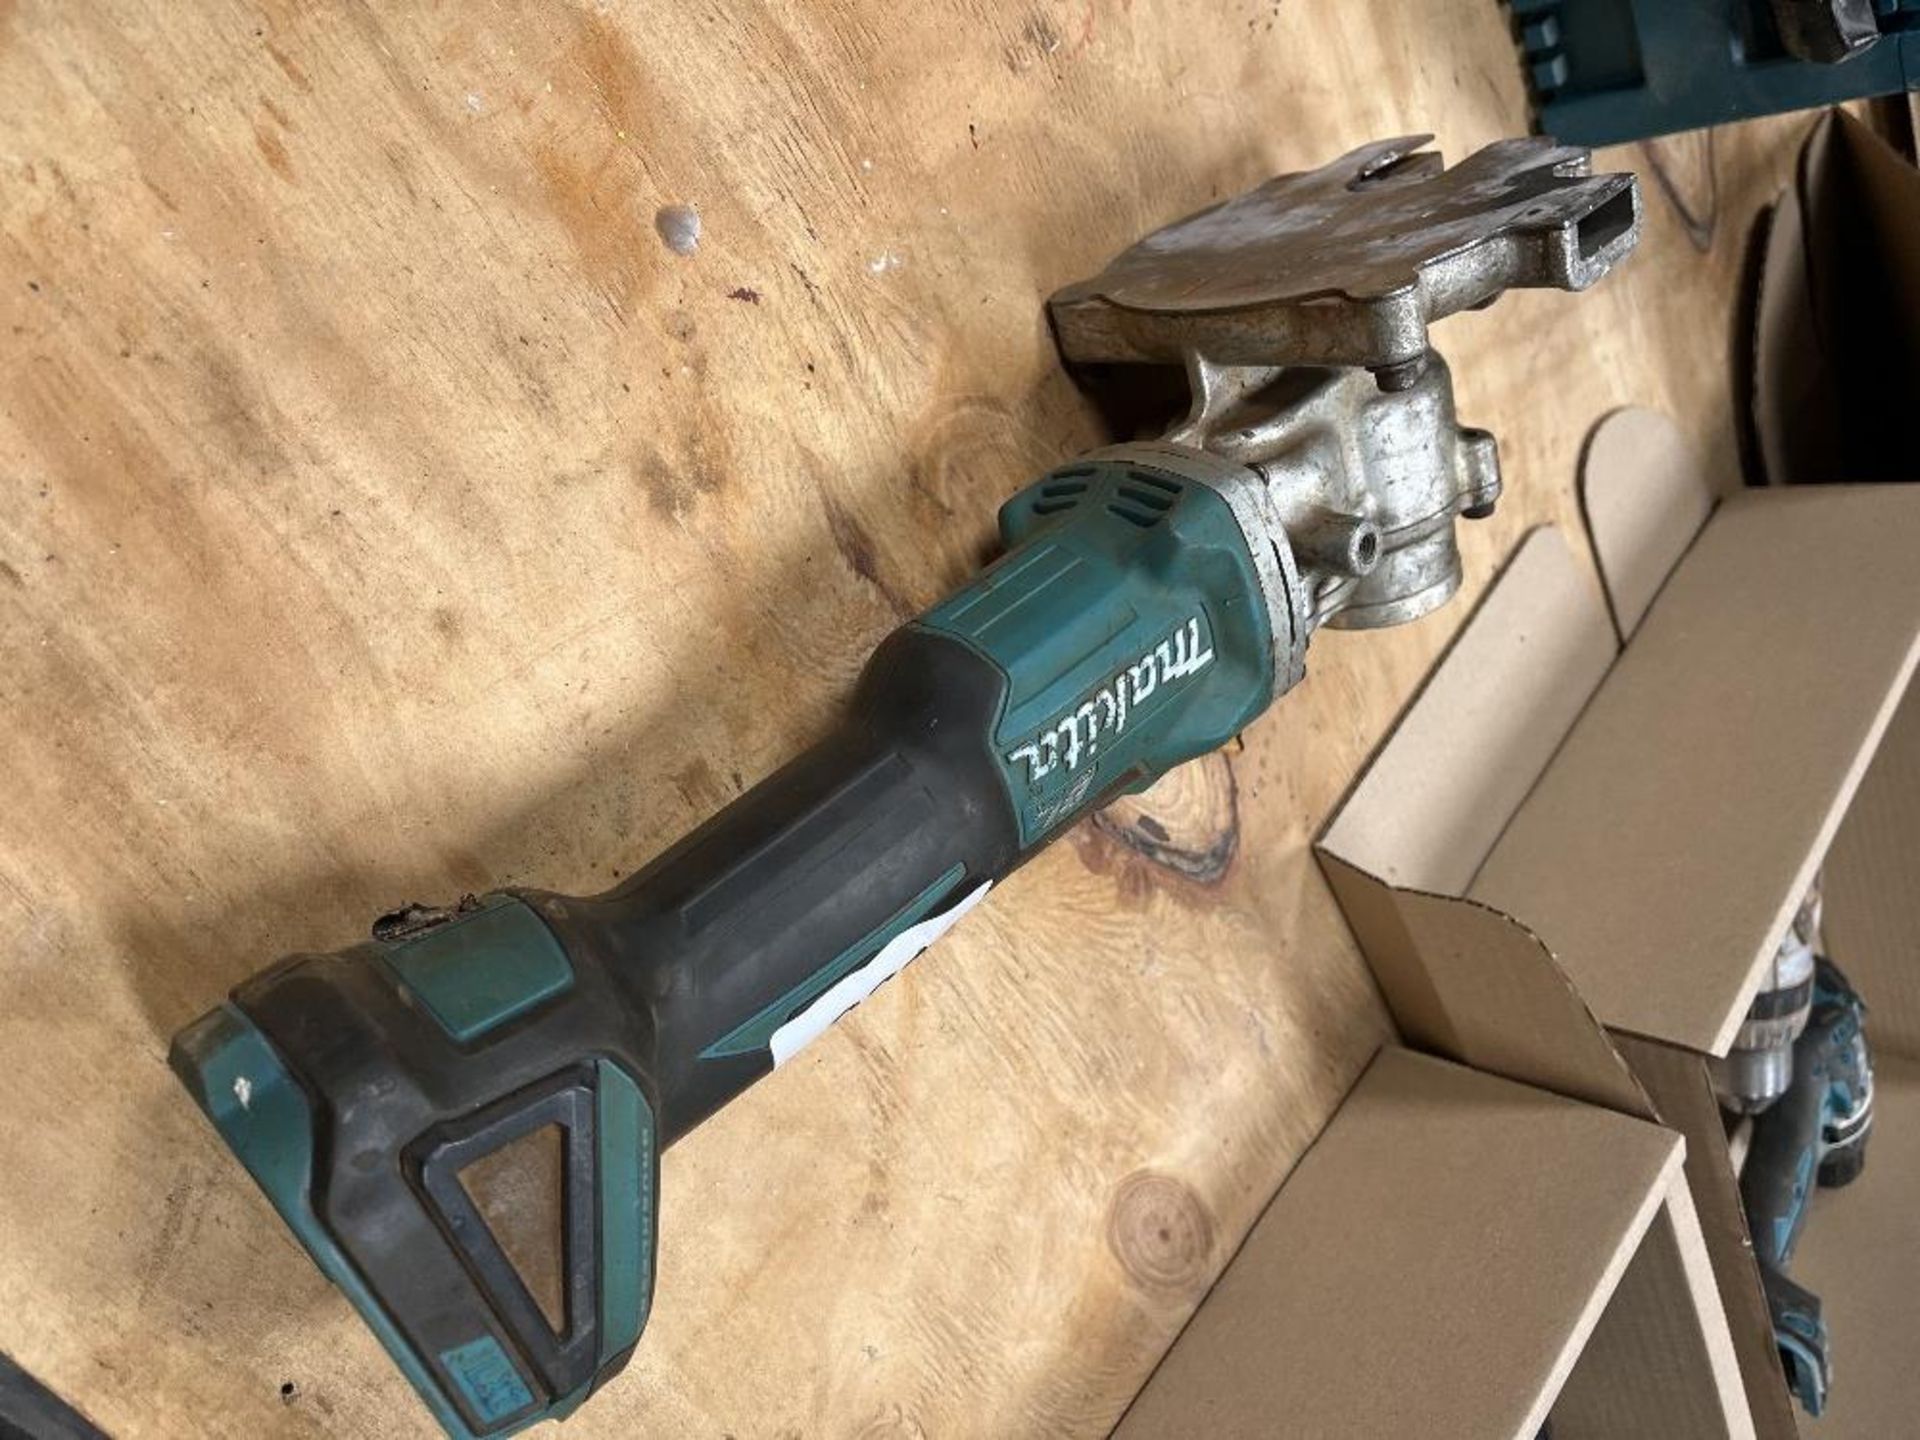 Makita battery angle grinder with bespoke head please note no battery or charger - Image 2 of 3